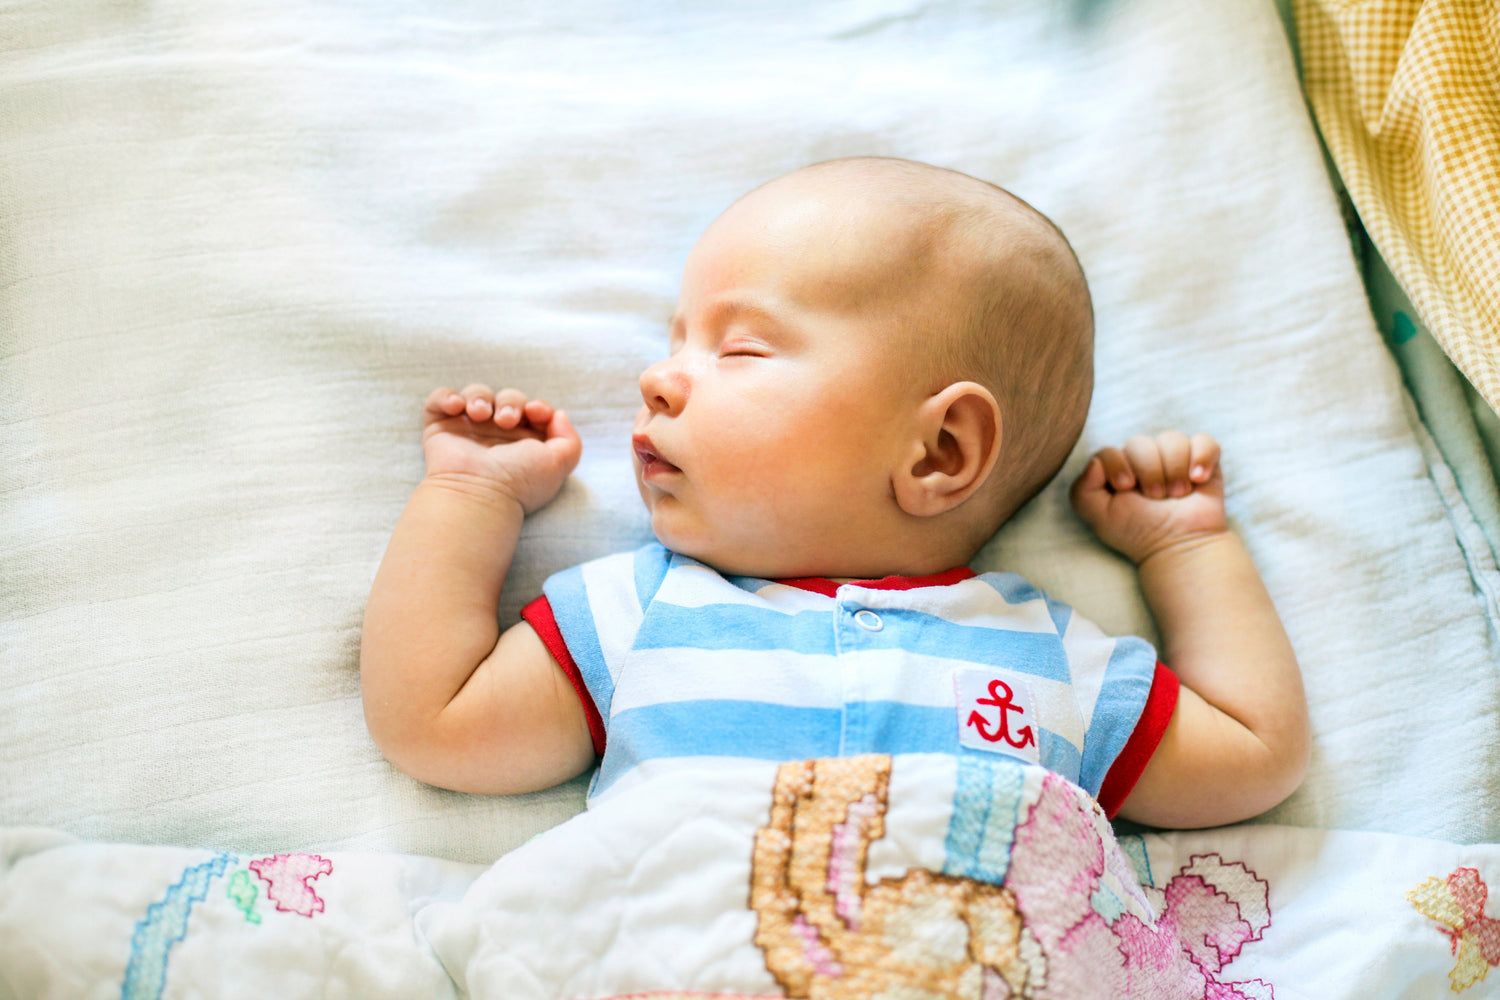 Is Your Baby Getting Enough Sleep?